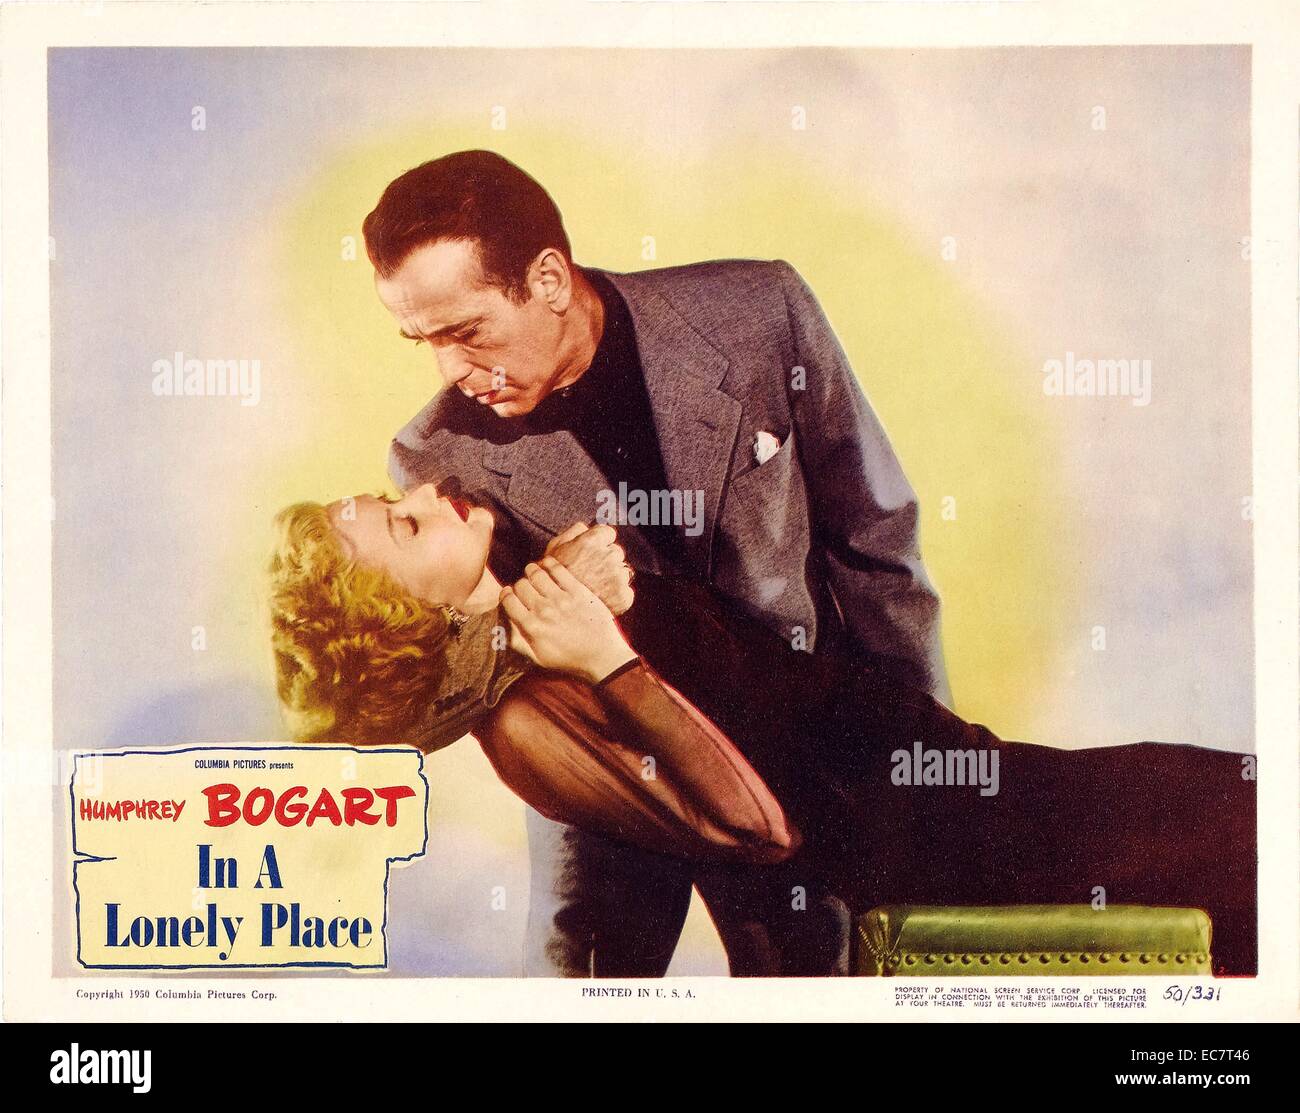 In a Lonely Place is a 1950 film noir directed by Nicholas Ray, and starring Humphrey Bogart and Gloria Grahame, produced for Bogart's Santana Productions. The script was adapted by Edmund North from the 1947 novel In a Lonely Place by Dorothy B. Hughes. Stock Photo